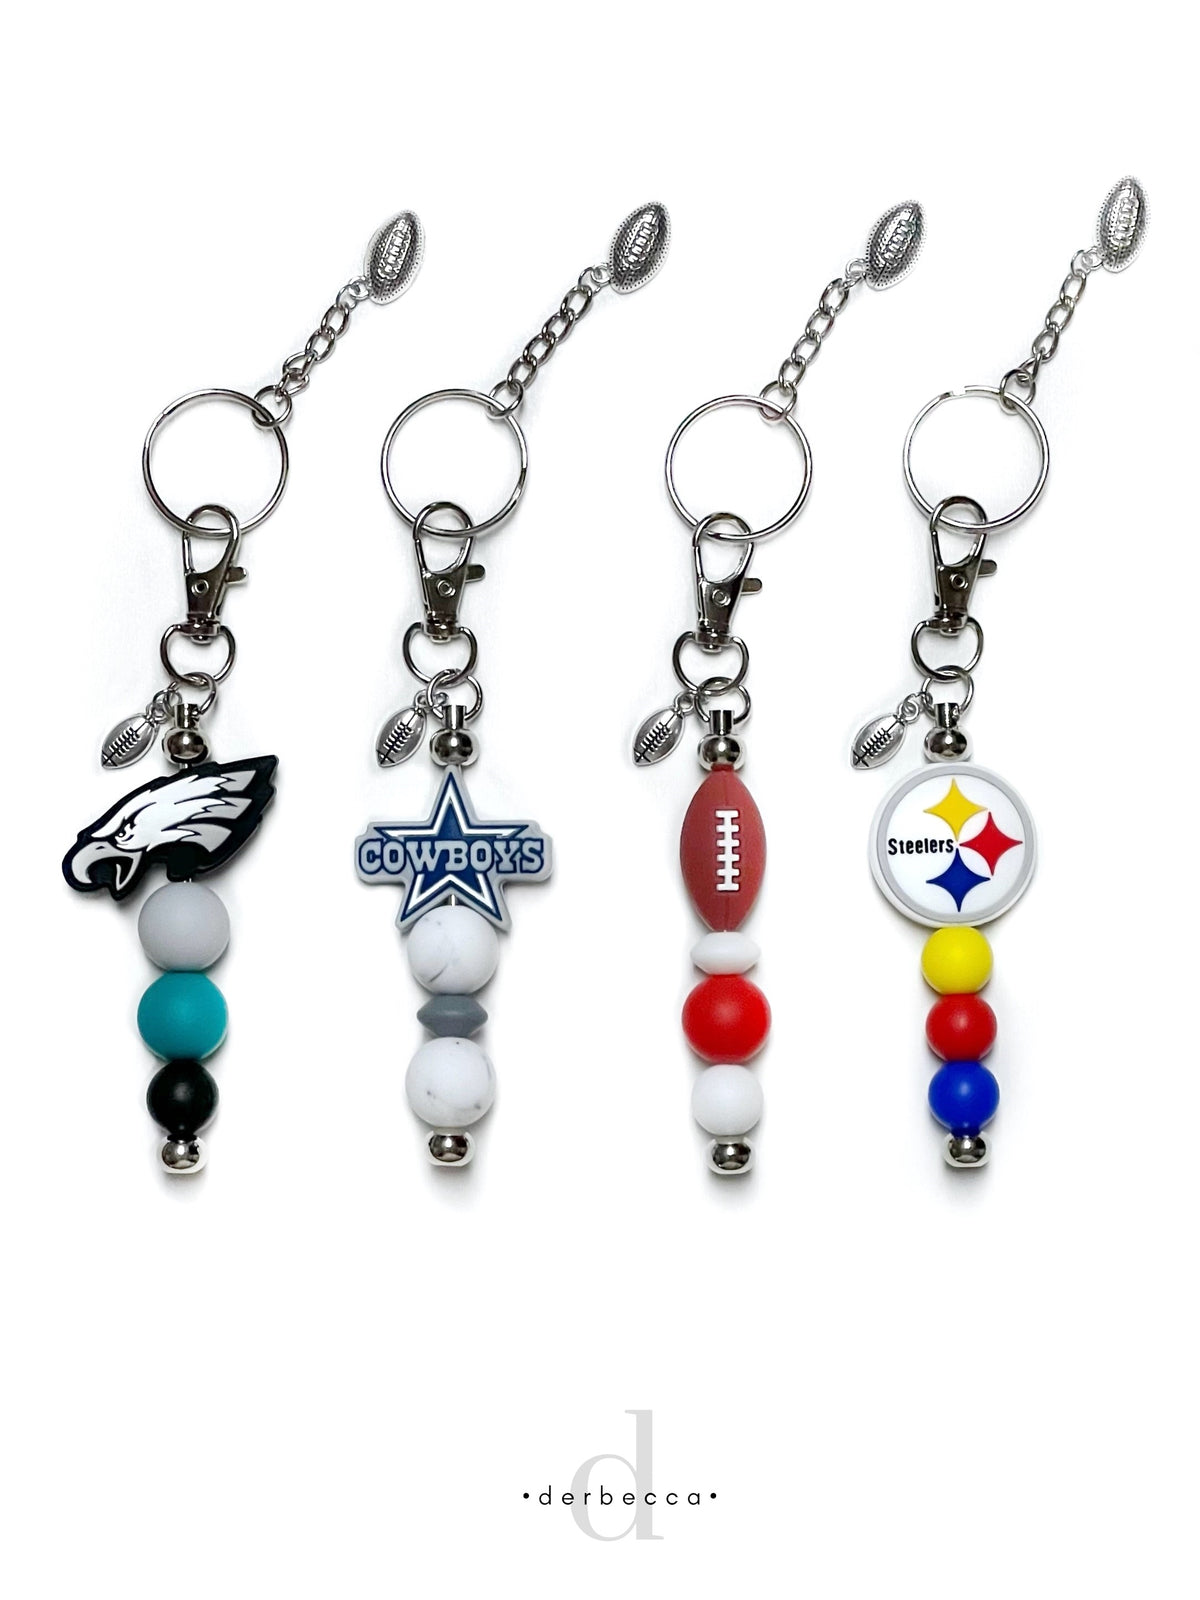 Sports Team Accessories, Keychains, Keyrings, Charms, Zipper Pulls, Clasps for 3D football, Eagles, Steelers, and Cowboys sports teams